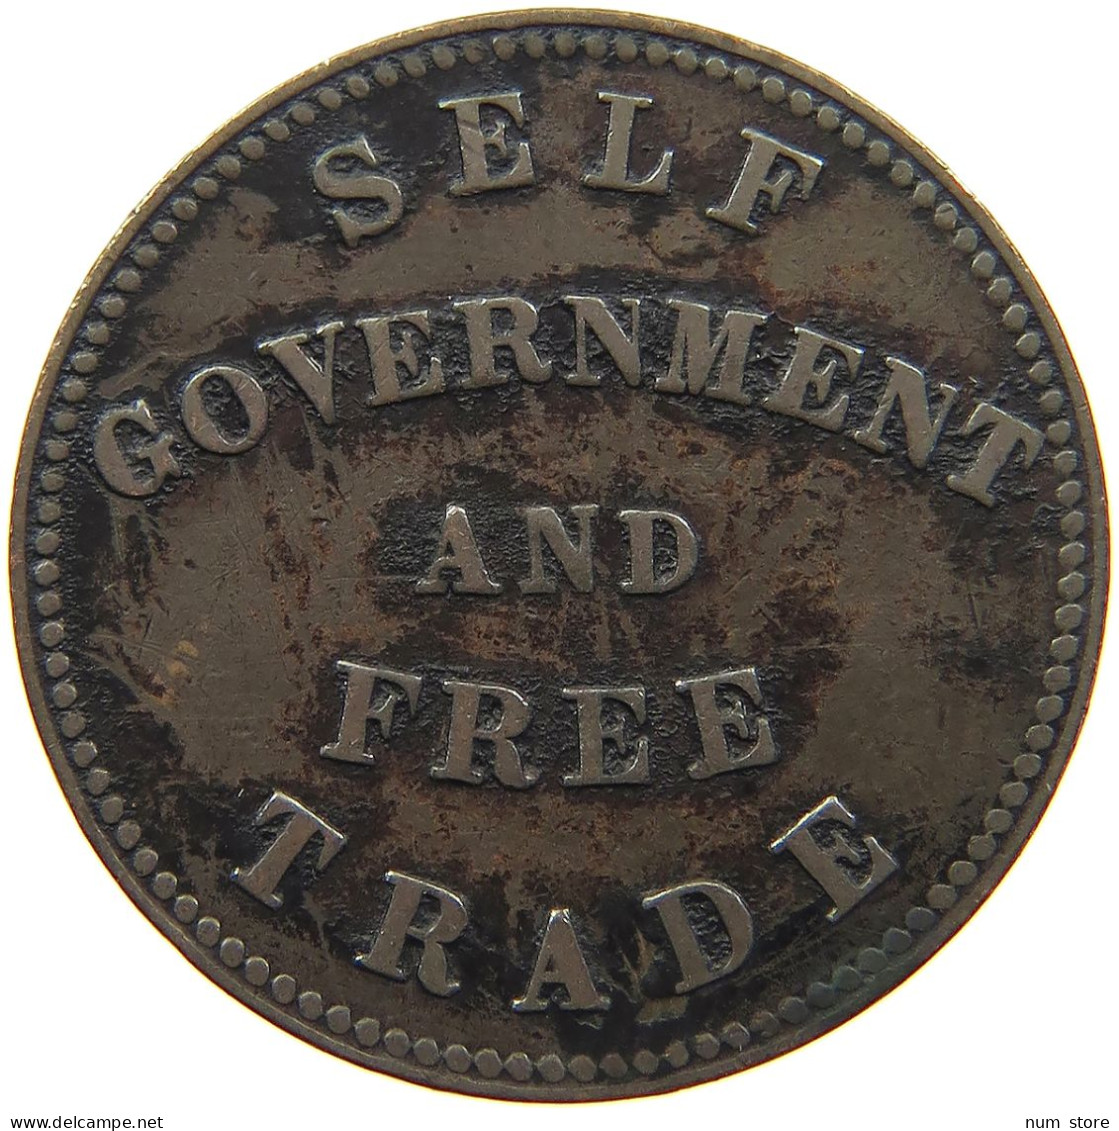 PRINCE EDWARD ISLAND TOKEN 1855 SELF GOVERNMENT AND FREE TRADE #t017 0305 - Canada